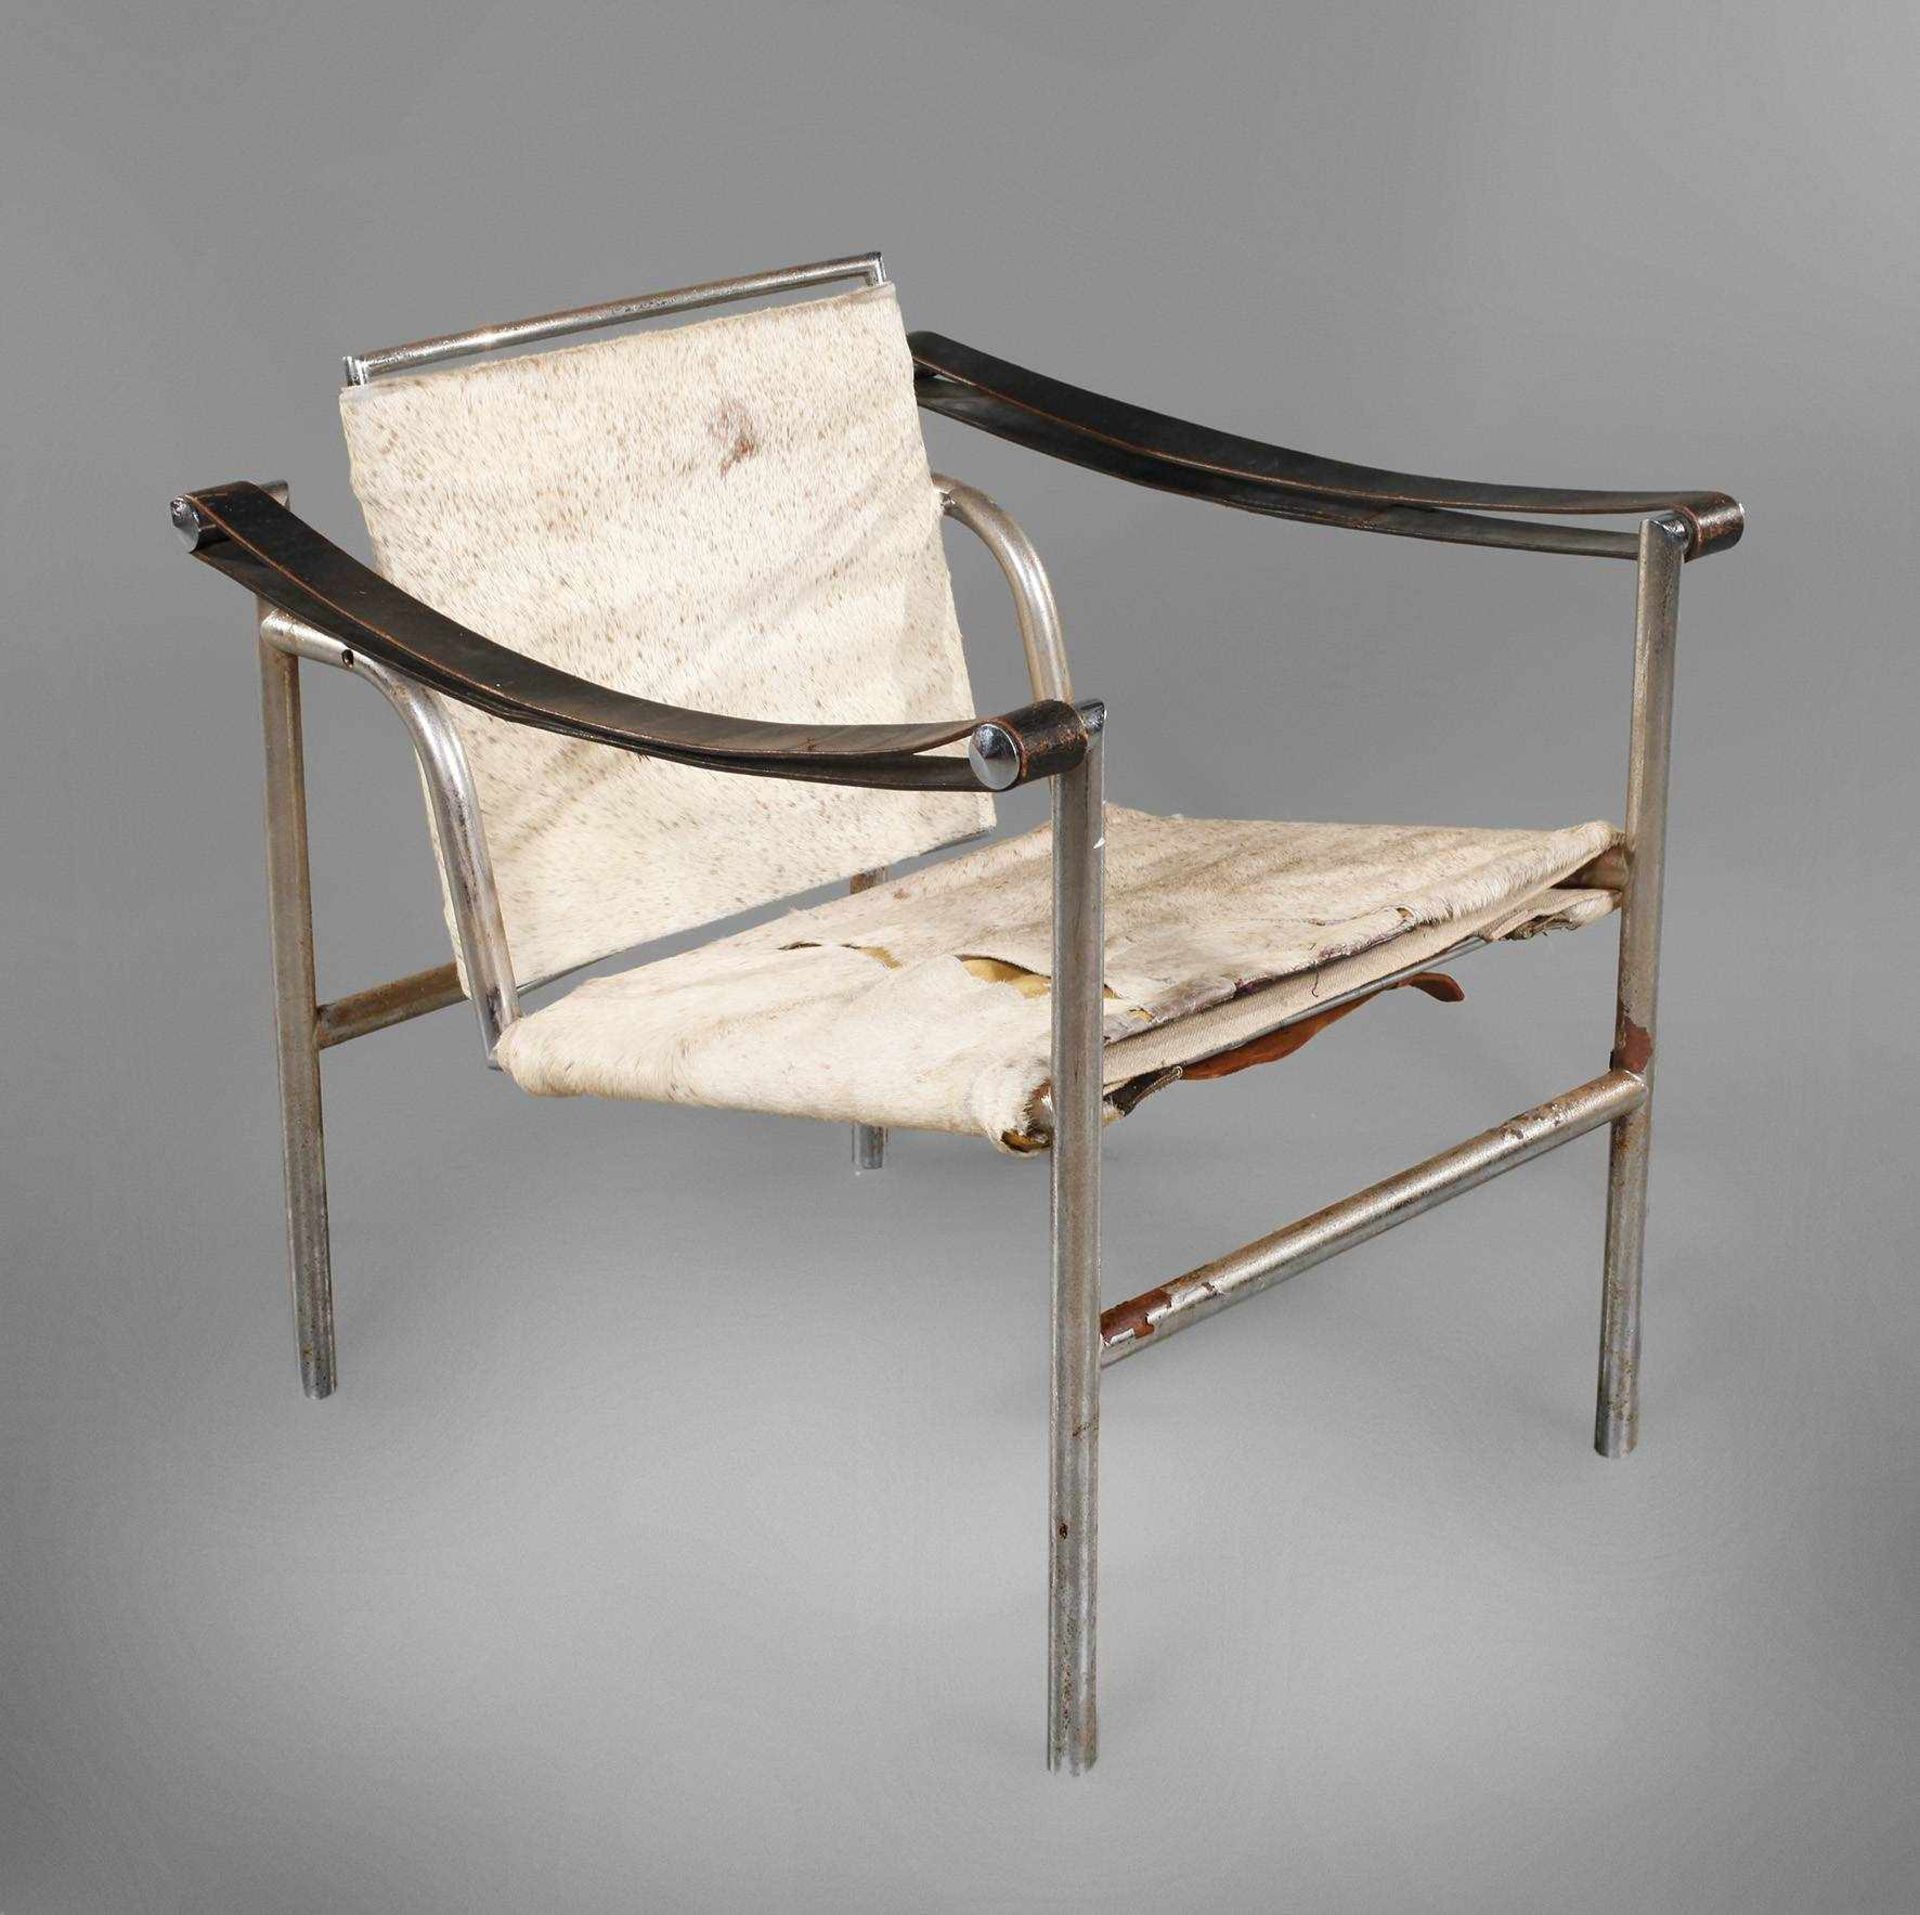 Sessel LC1Entwurf Le Corbusier 1928, Ausführung Cassina Mailand, wohl 1970er Jahre, Gestell